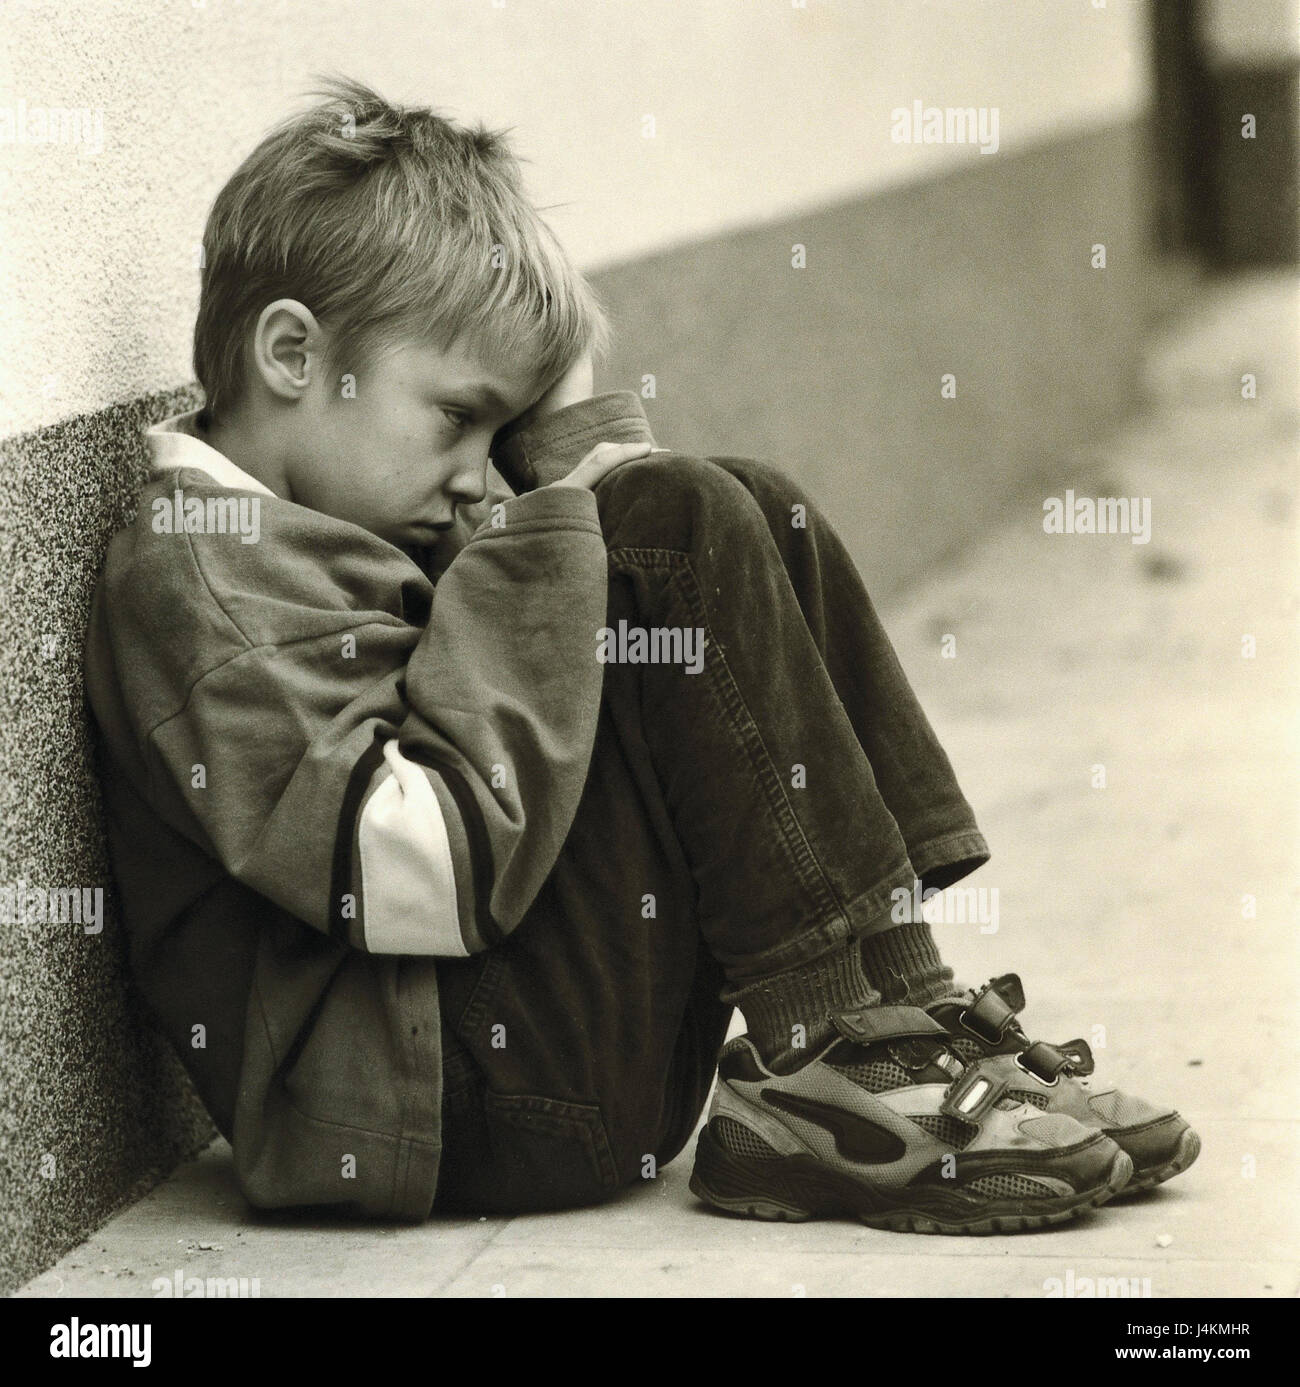 Wall of a house, boy, floor, sit, add support seriously, head, s/w outside, child, tuning, negatively, sadly, dealts with, lonely, only, annoys, anxiously, worried, annoyance, fear, frightened, Shyly, thoughtfully, unhappily Stock Photo